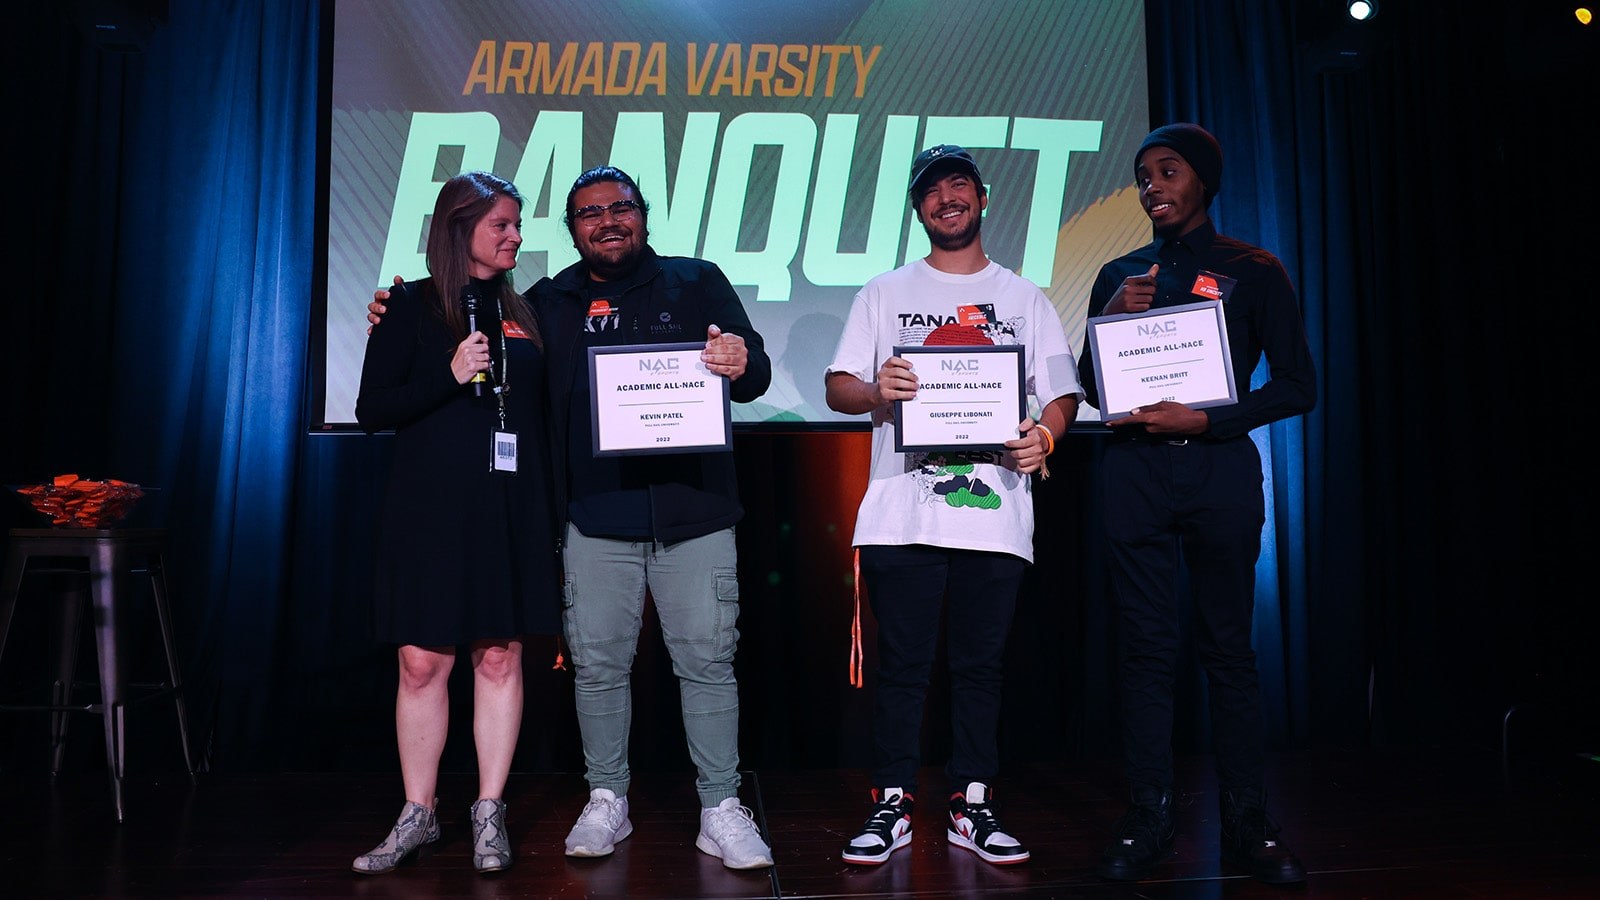 Director of Esports and Project Development, Sari Kitelyn, on stage with the three campus students who received NACE All-Academic awards.